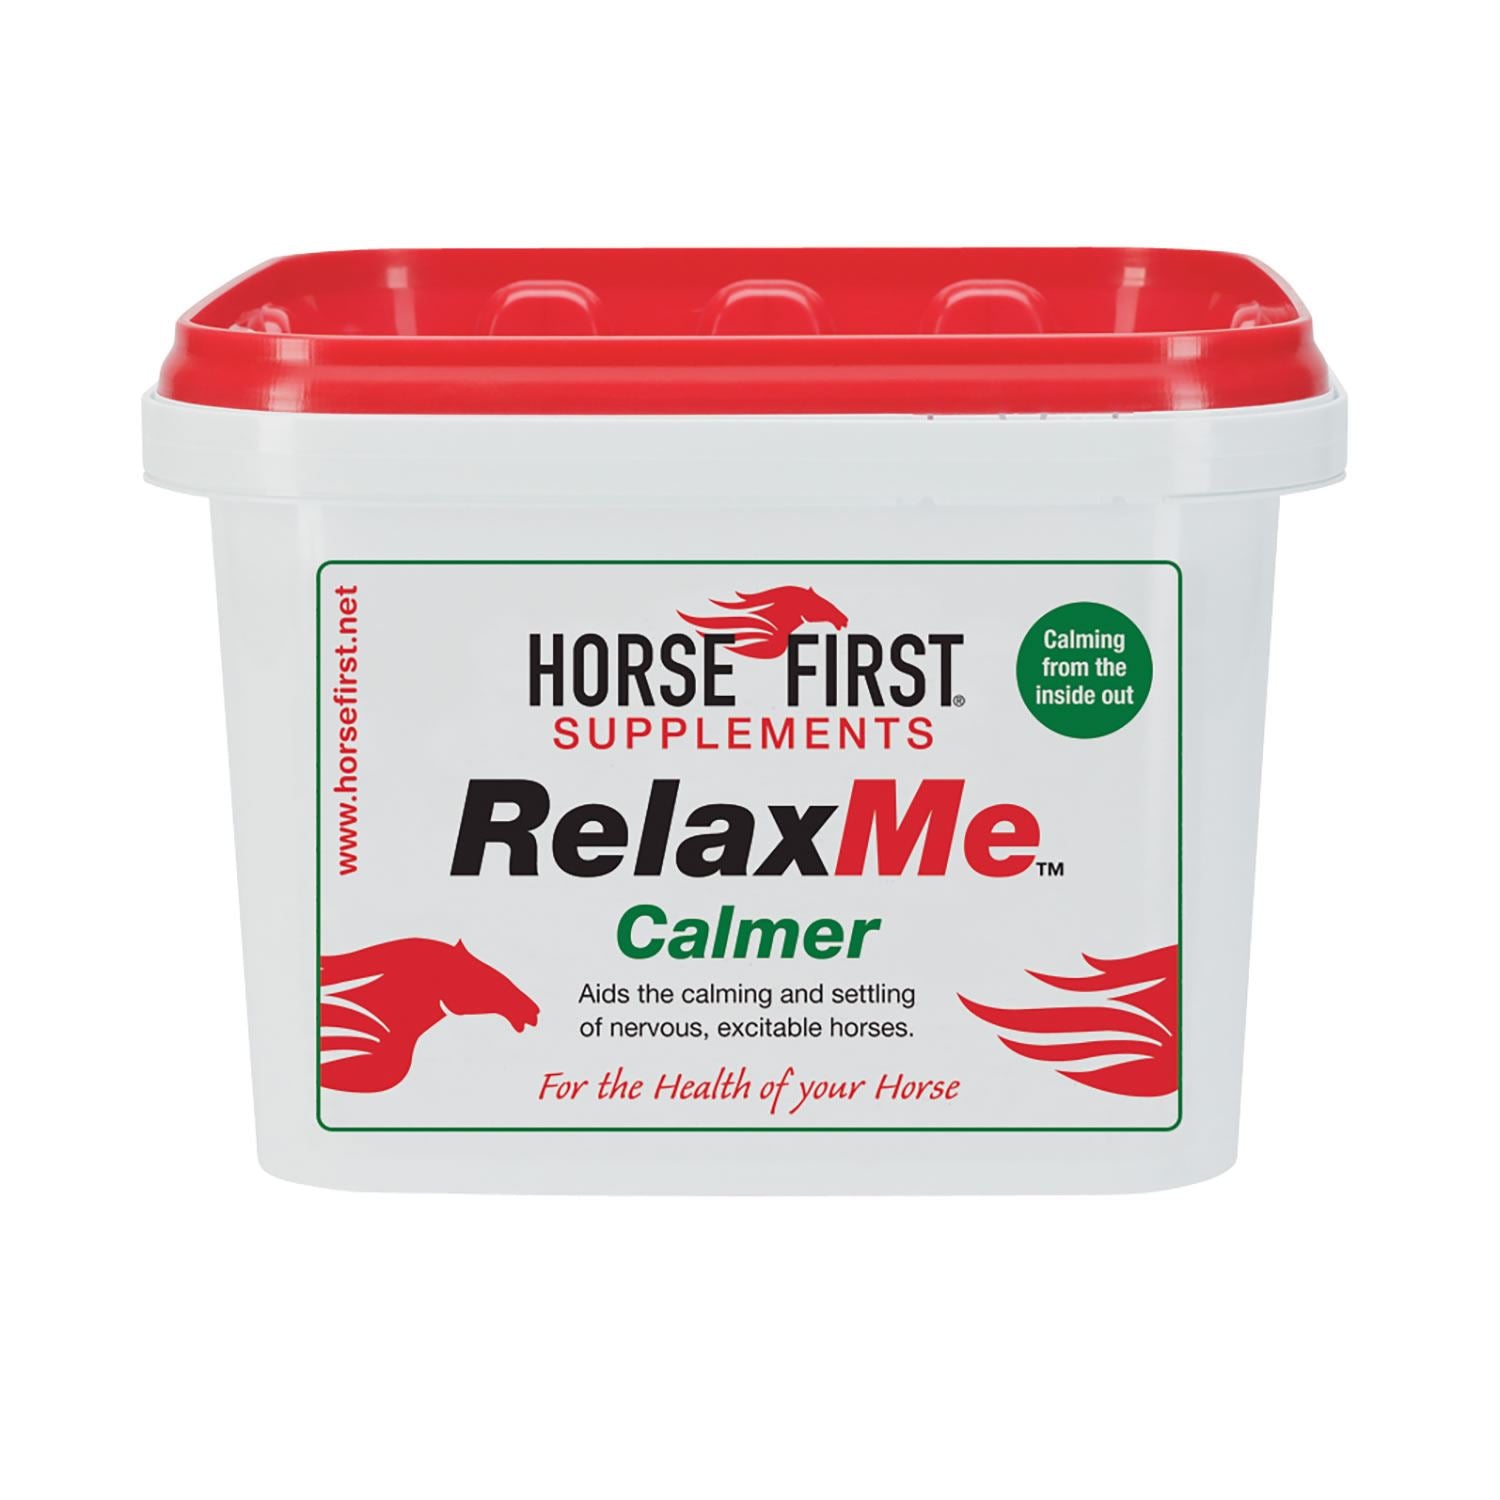 Horse First Relax Me supplement for calming anxious horses